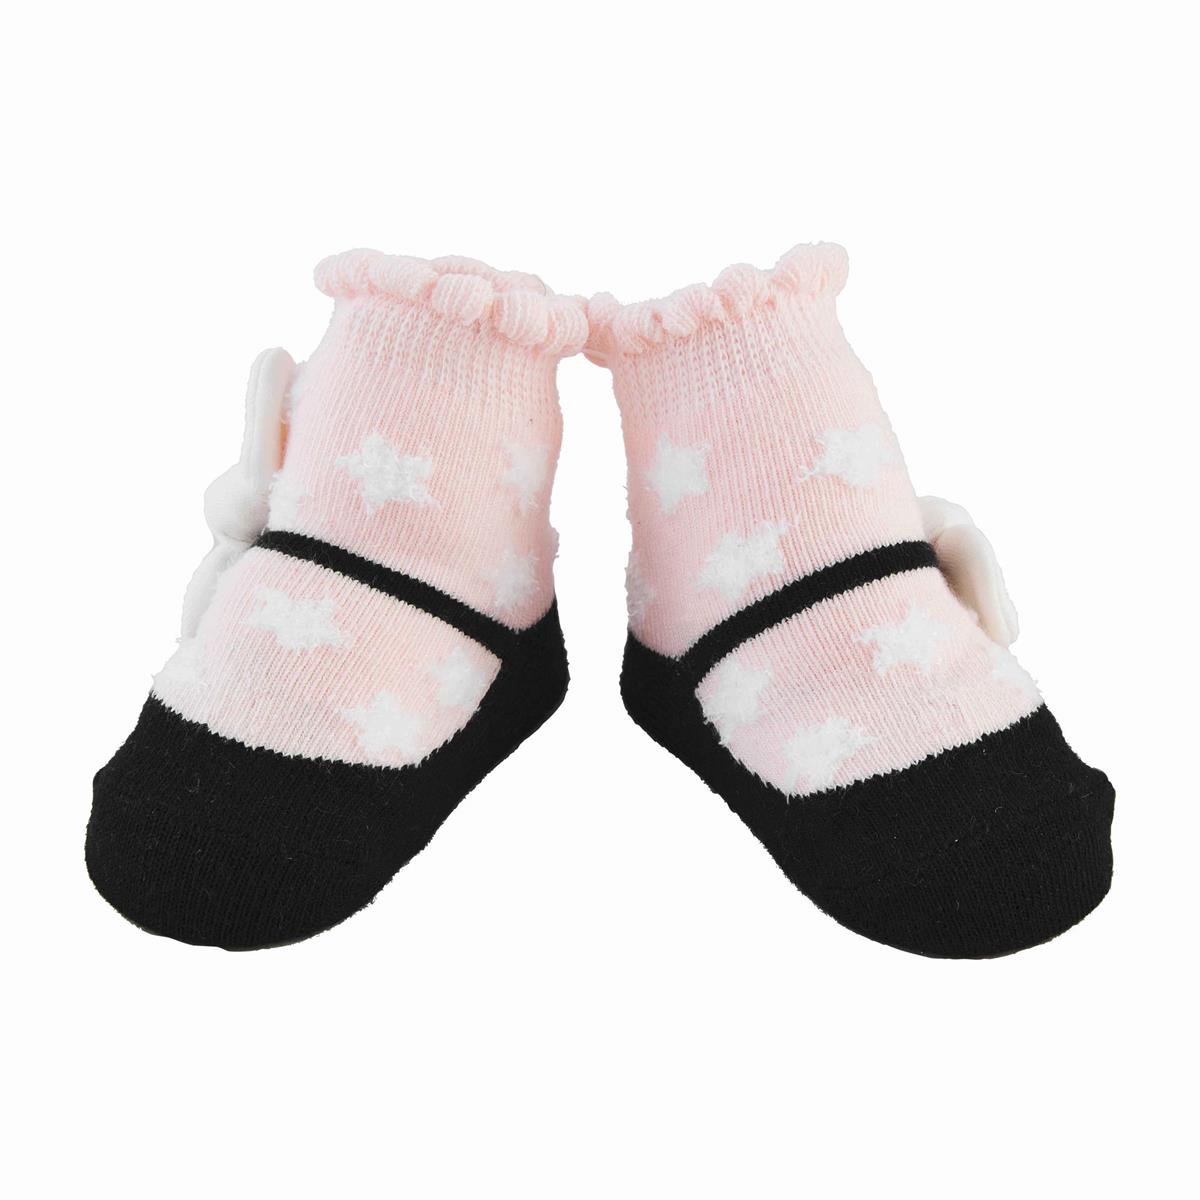 pink infant socks with white stars and black mary jane style shoe design.